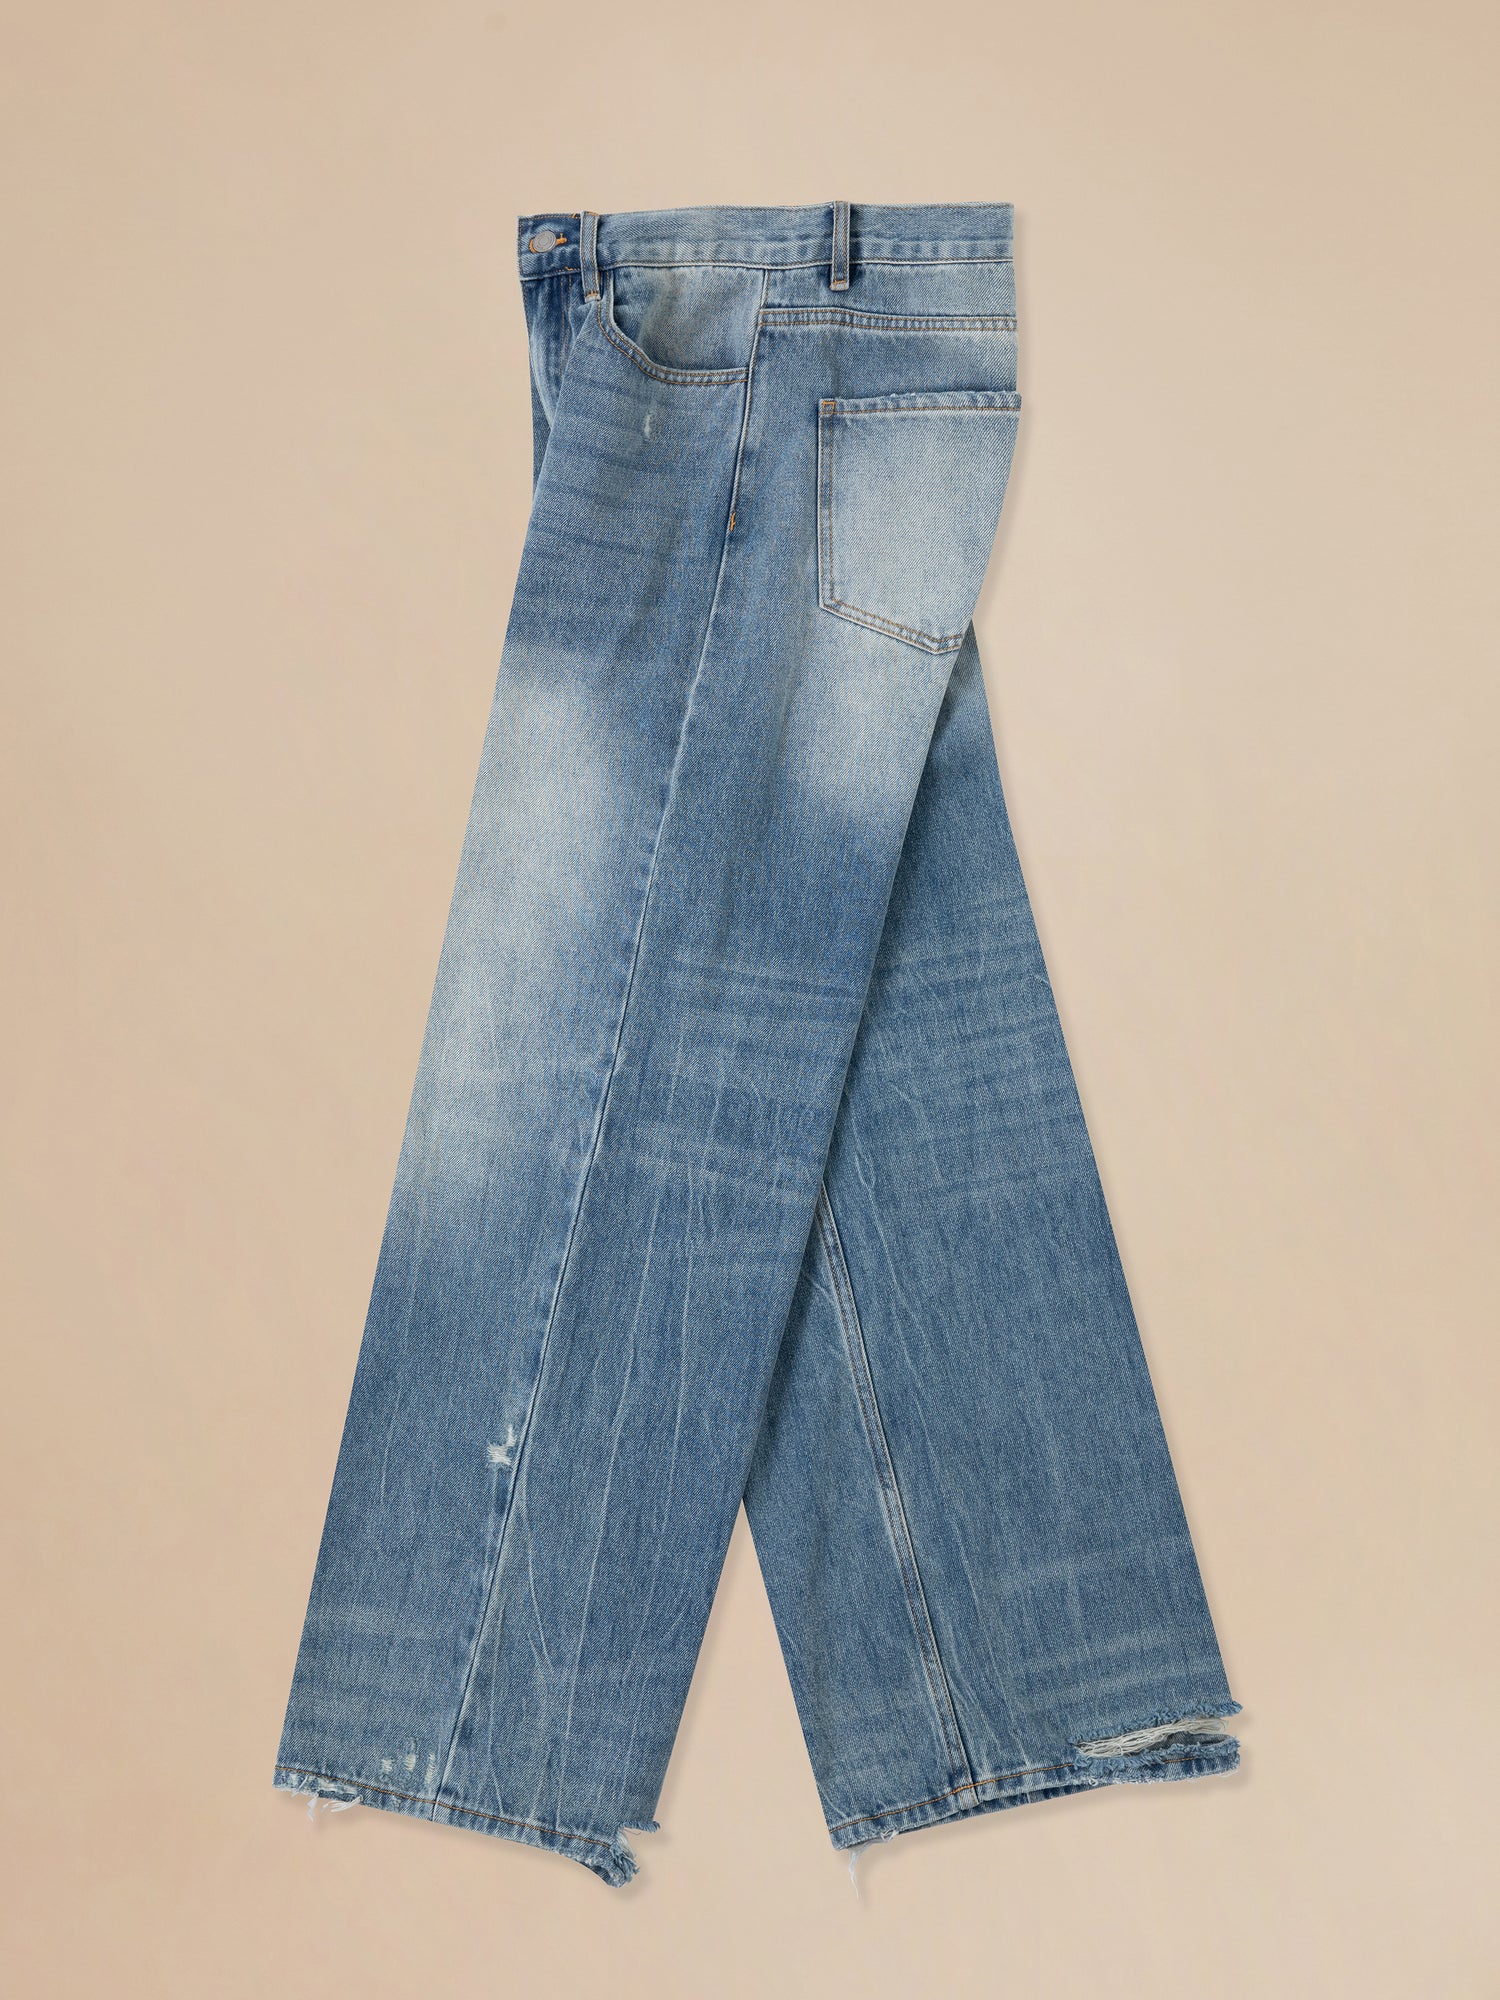 A pair of Found Lacy Baggy Jeans with frayed edges.